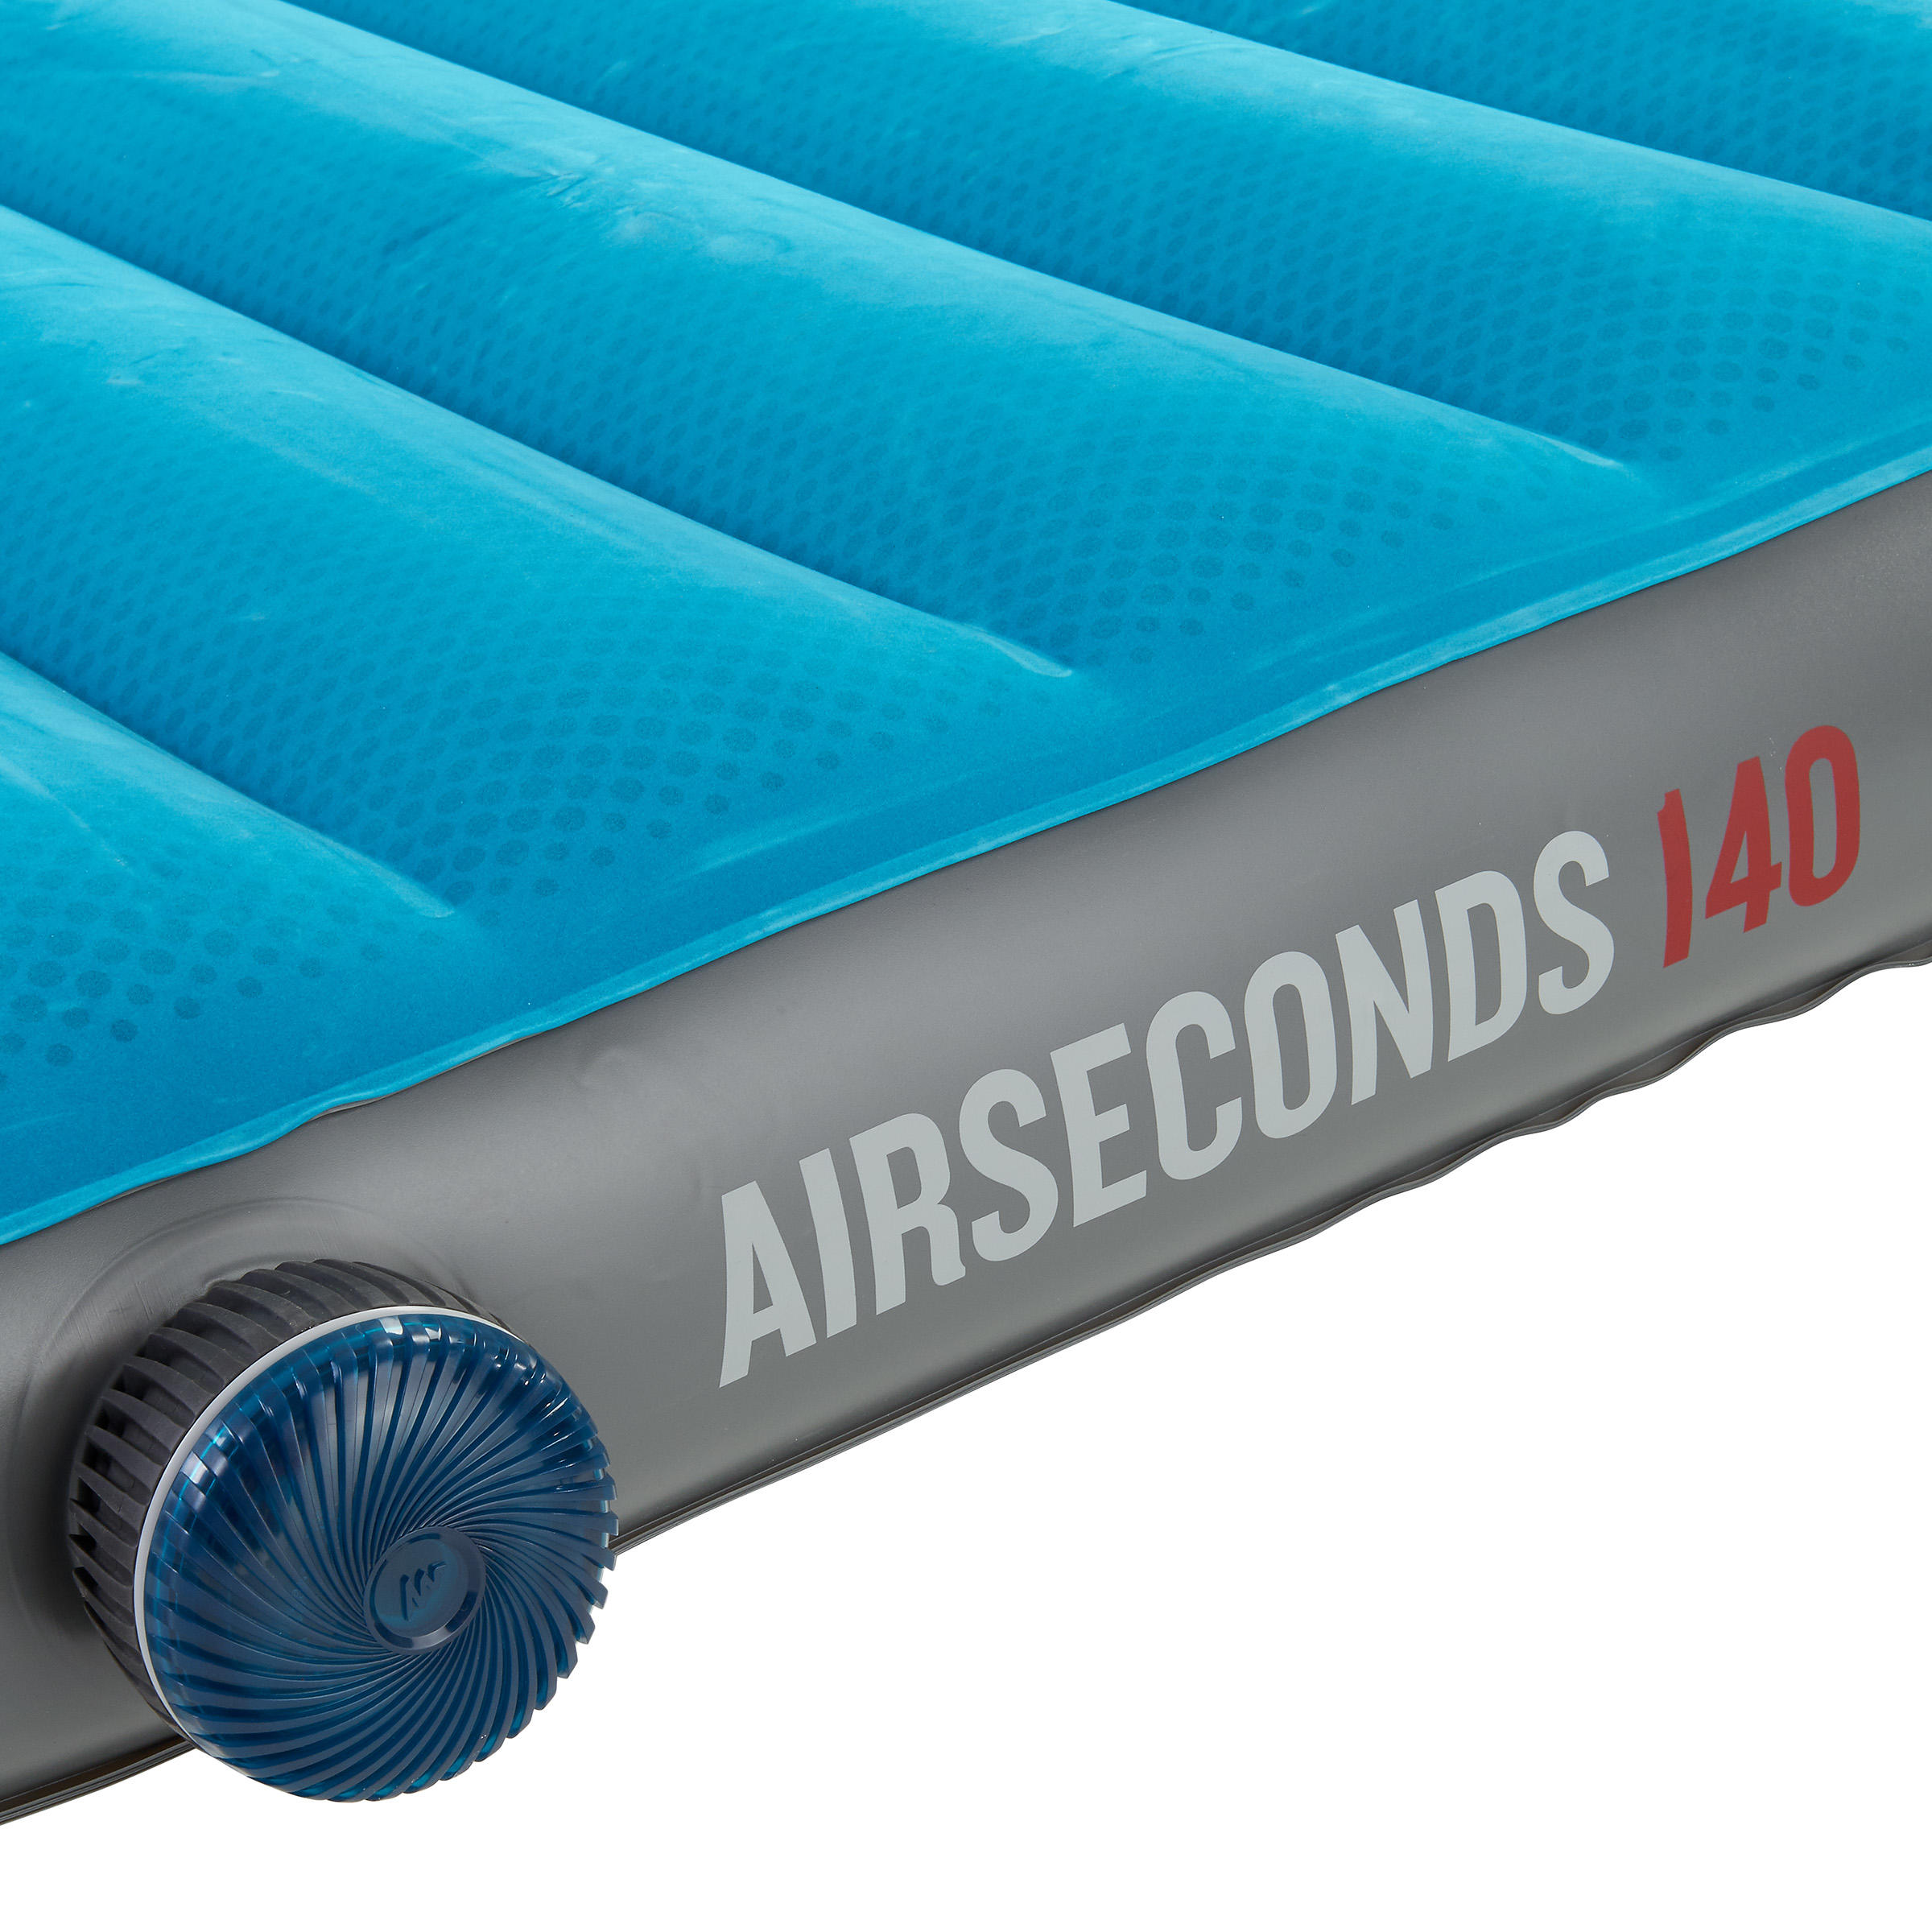 Air Seconds 2 Person Inflatable Mattress 6/11